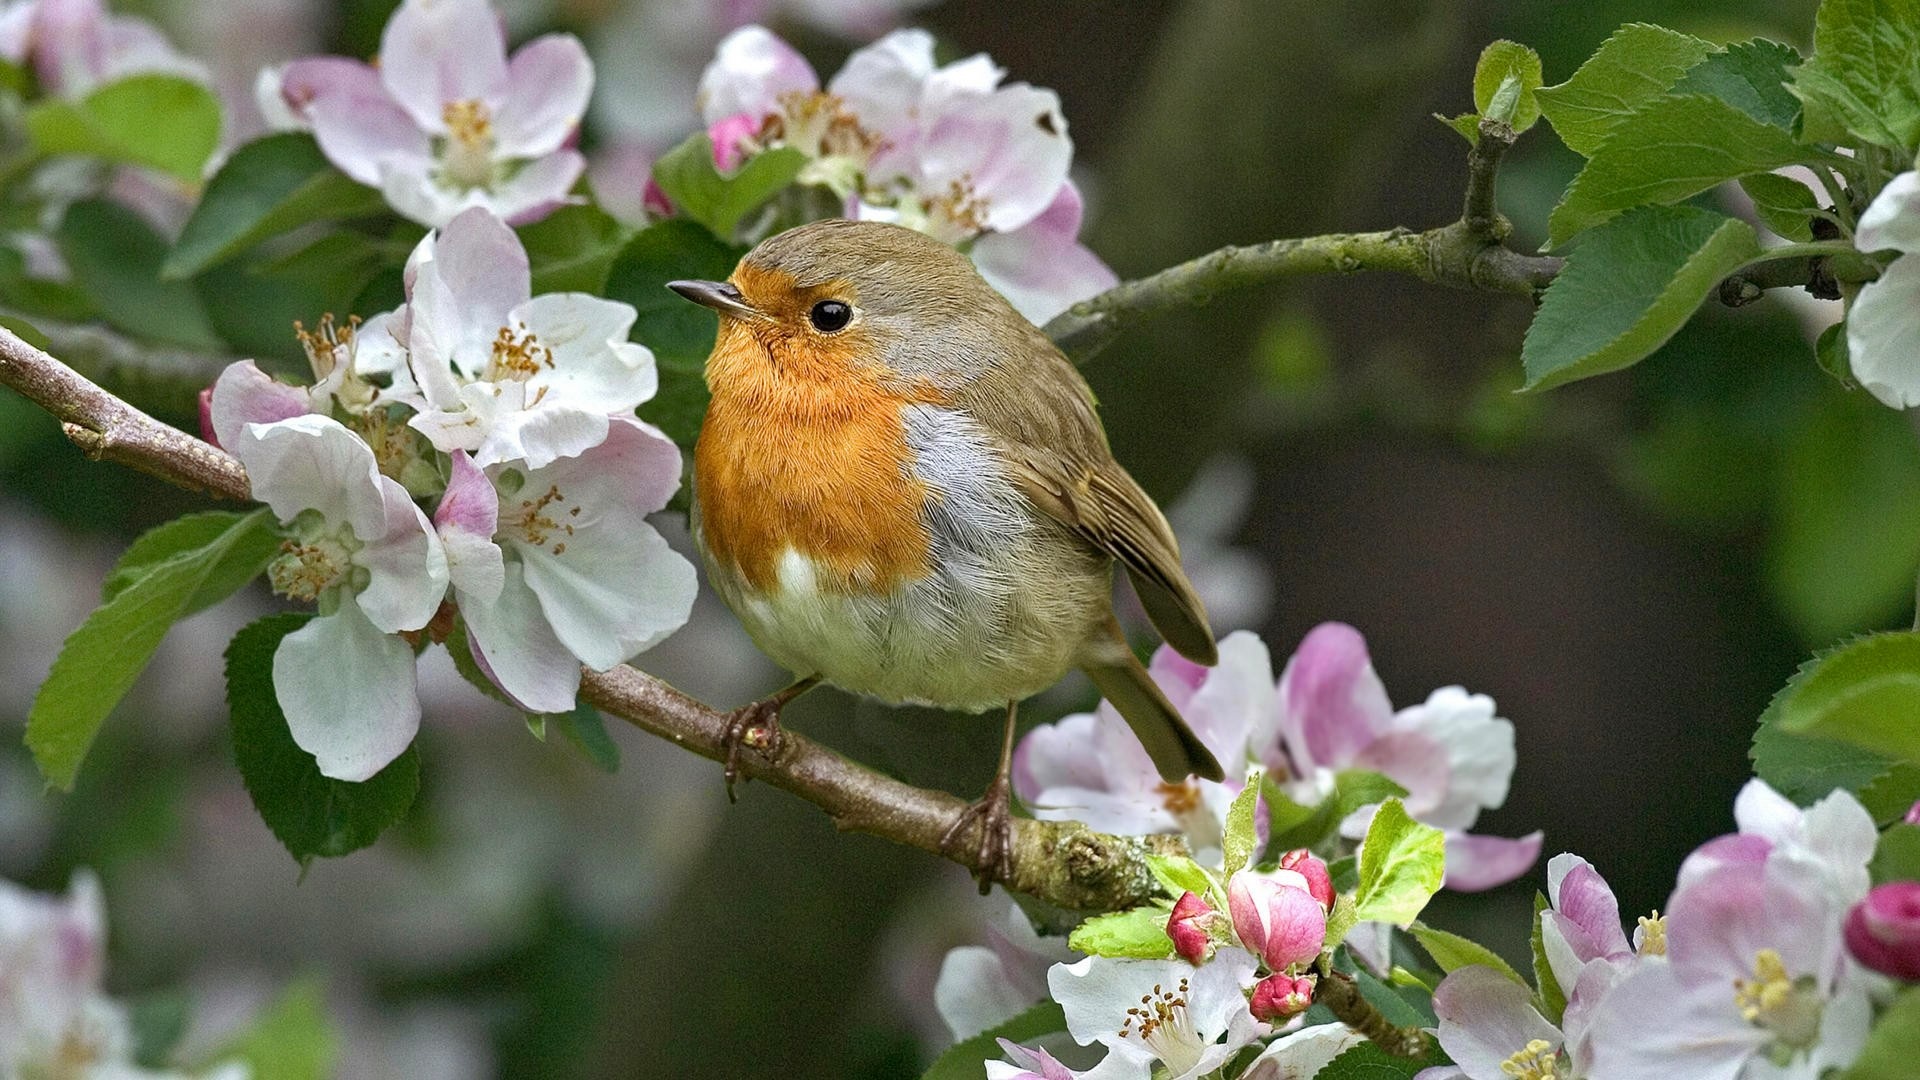 Robins bird in HD, High-quality images, Feathered beauty, Avian wonders, 1920x1080 Full HD Desktop